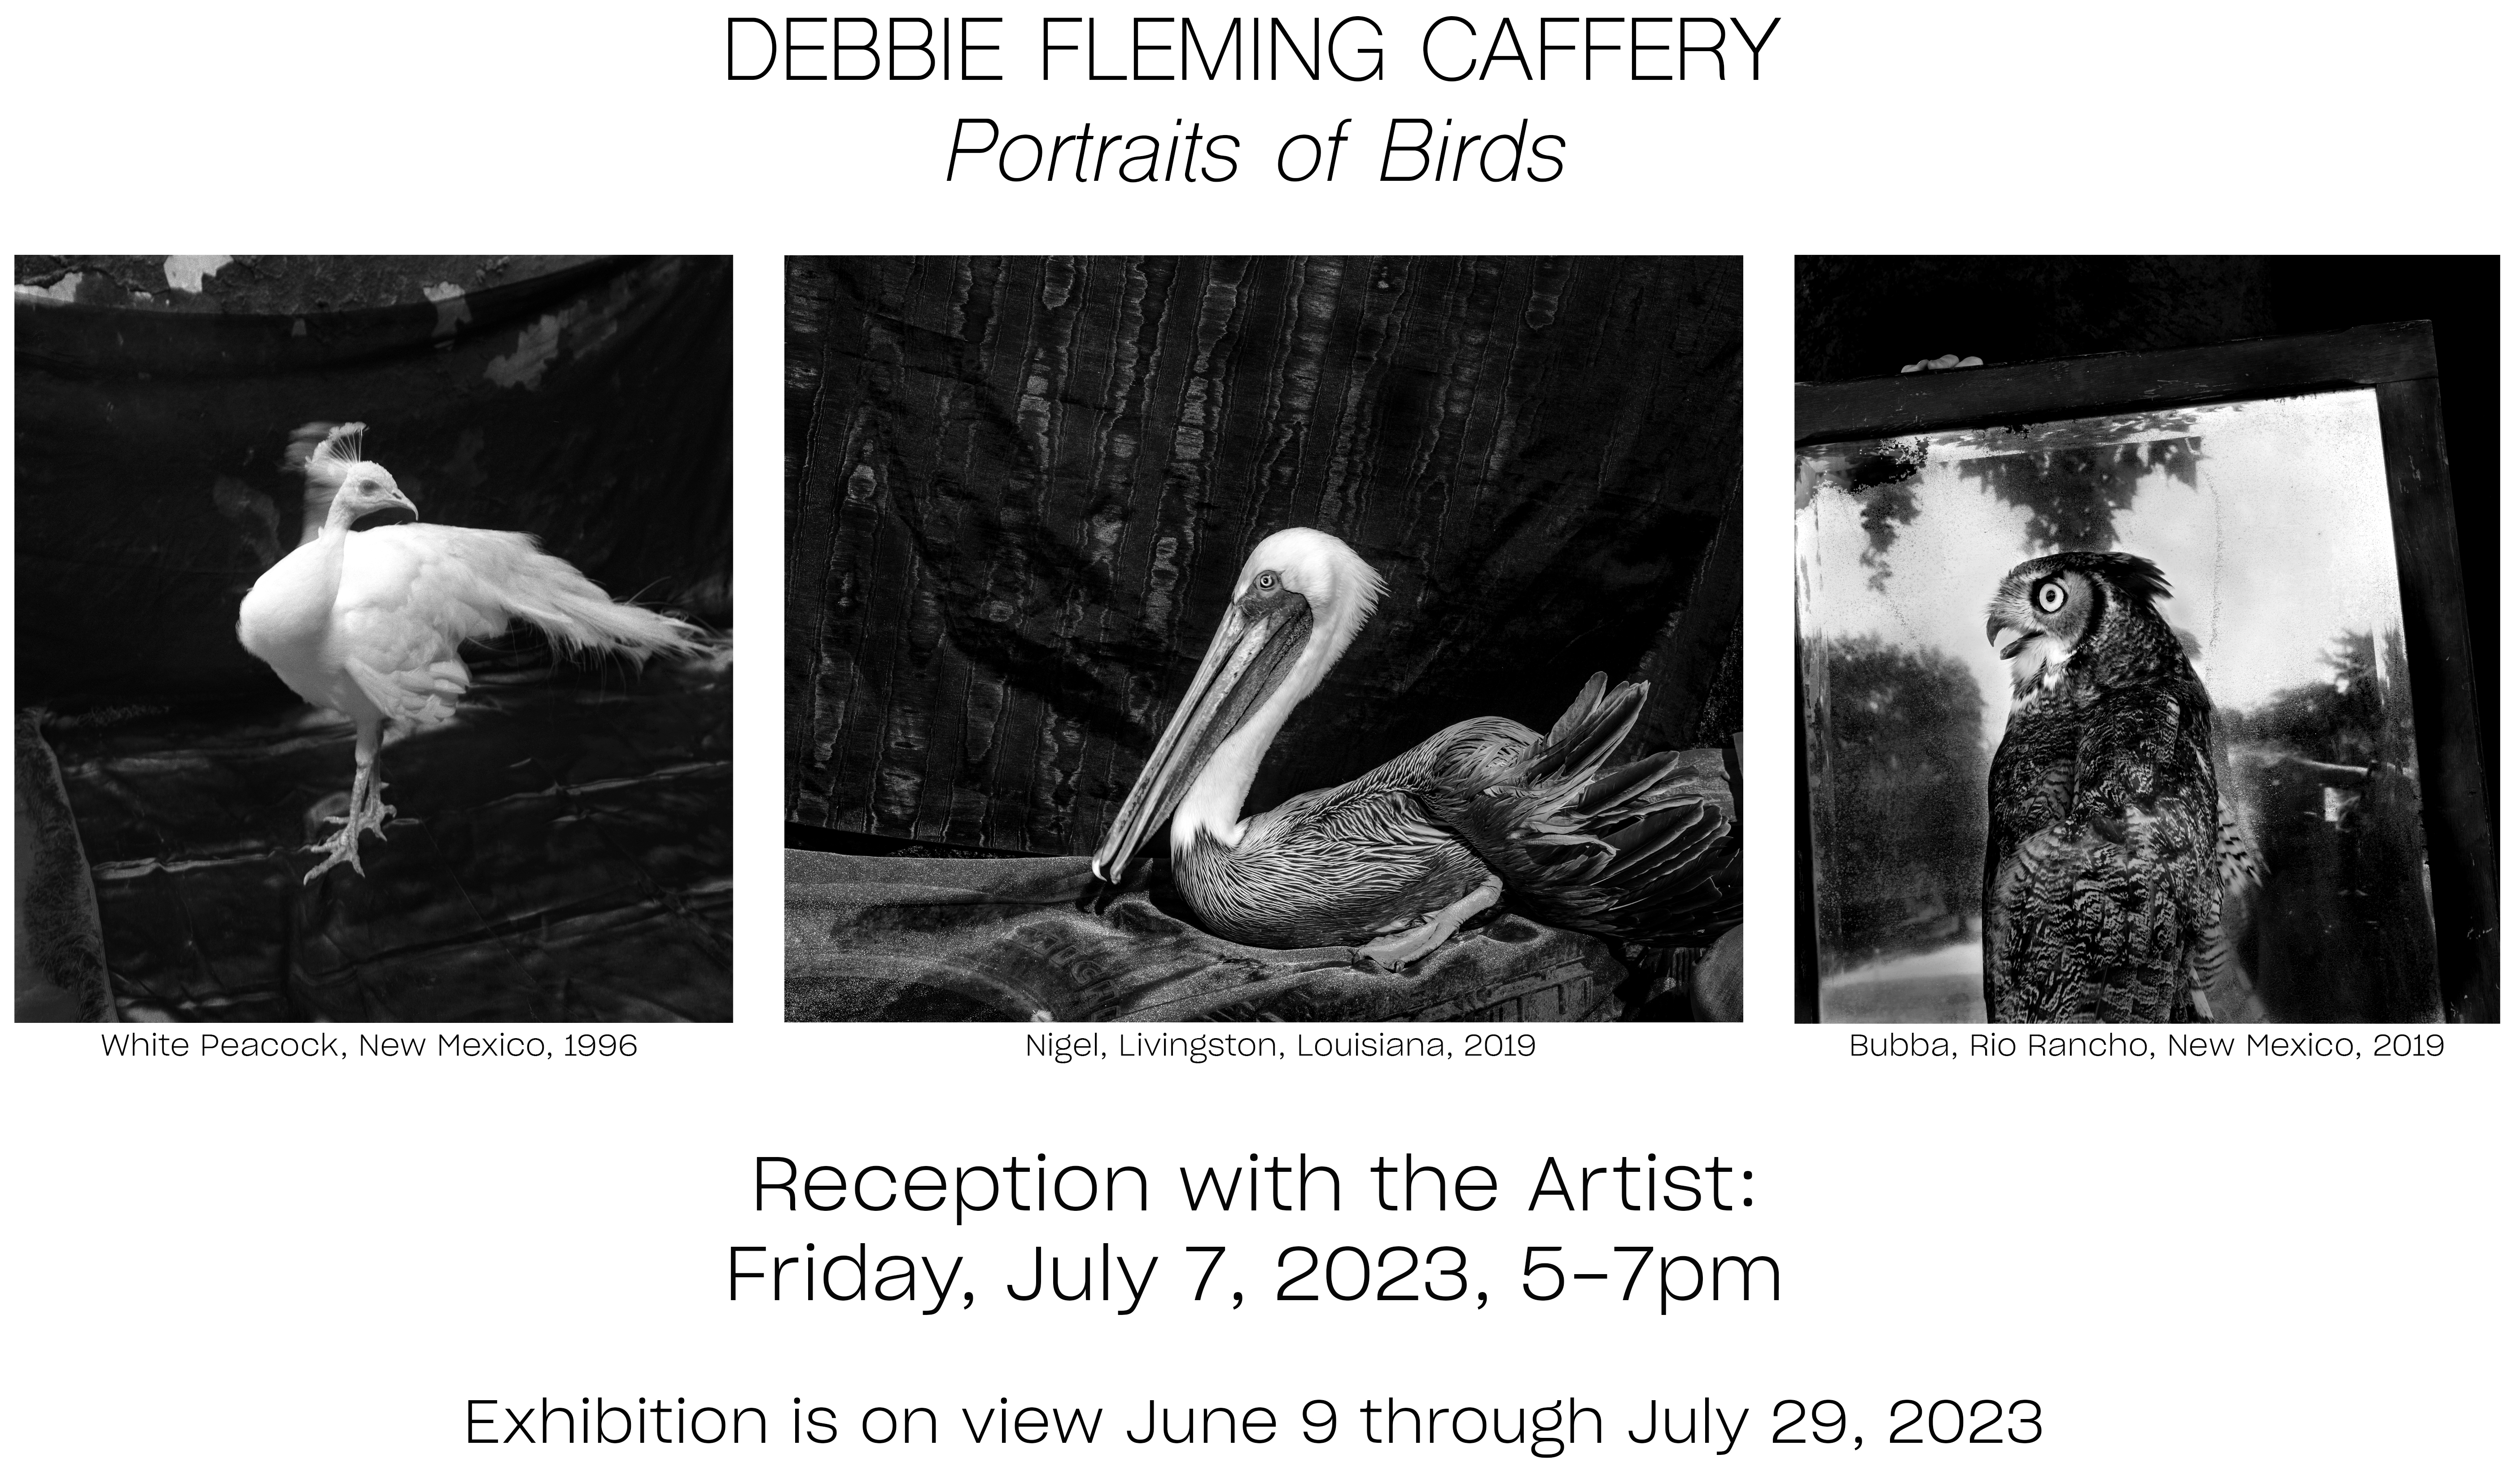 Debbie Fleming Caffery: Portraits of Birds. Reception with teh artist, Friday, July 7 5-7pm. Exhibition is on view June 9 - July 29, 2023.